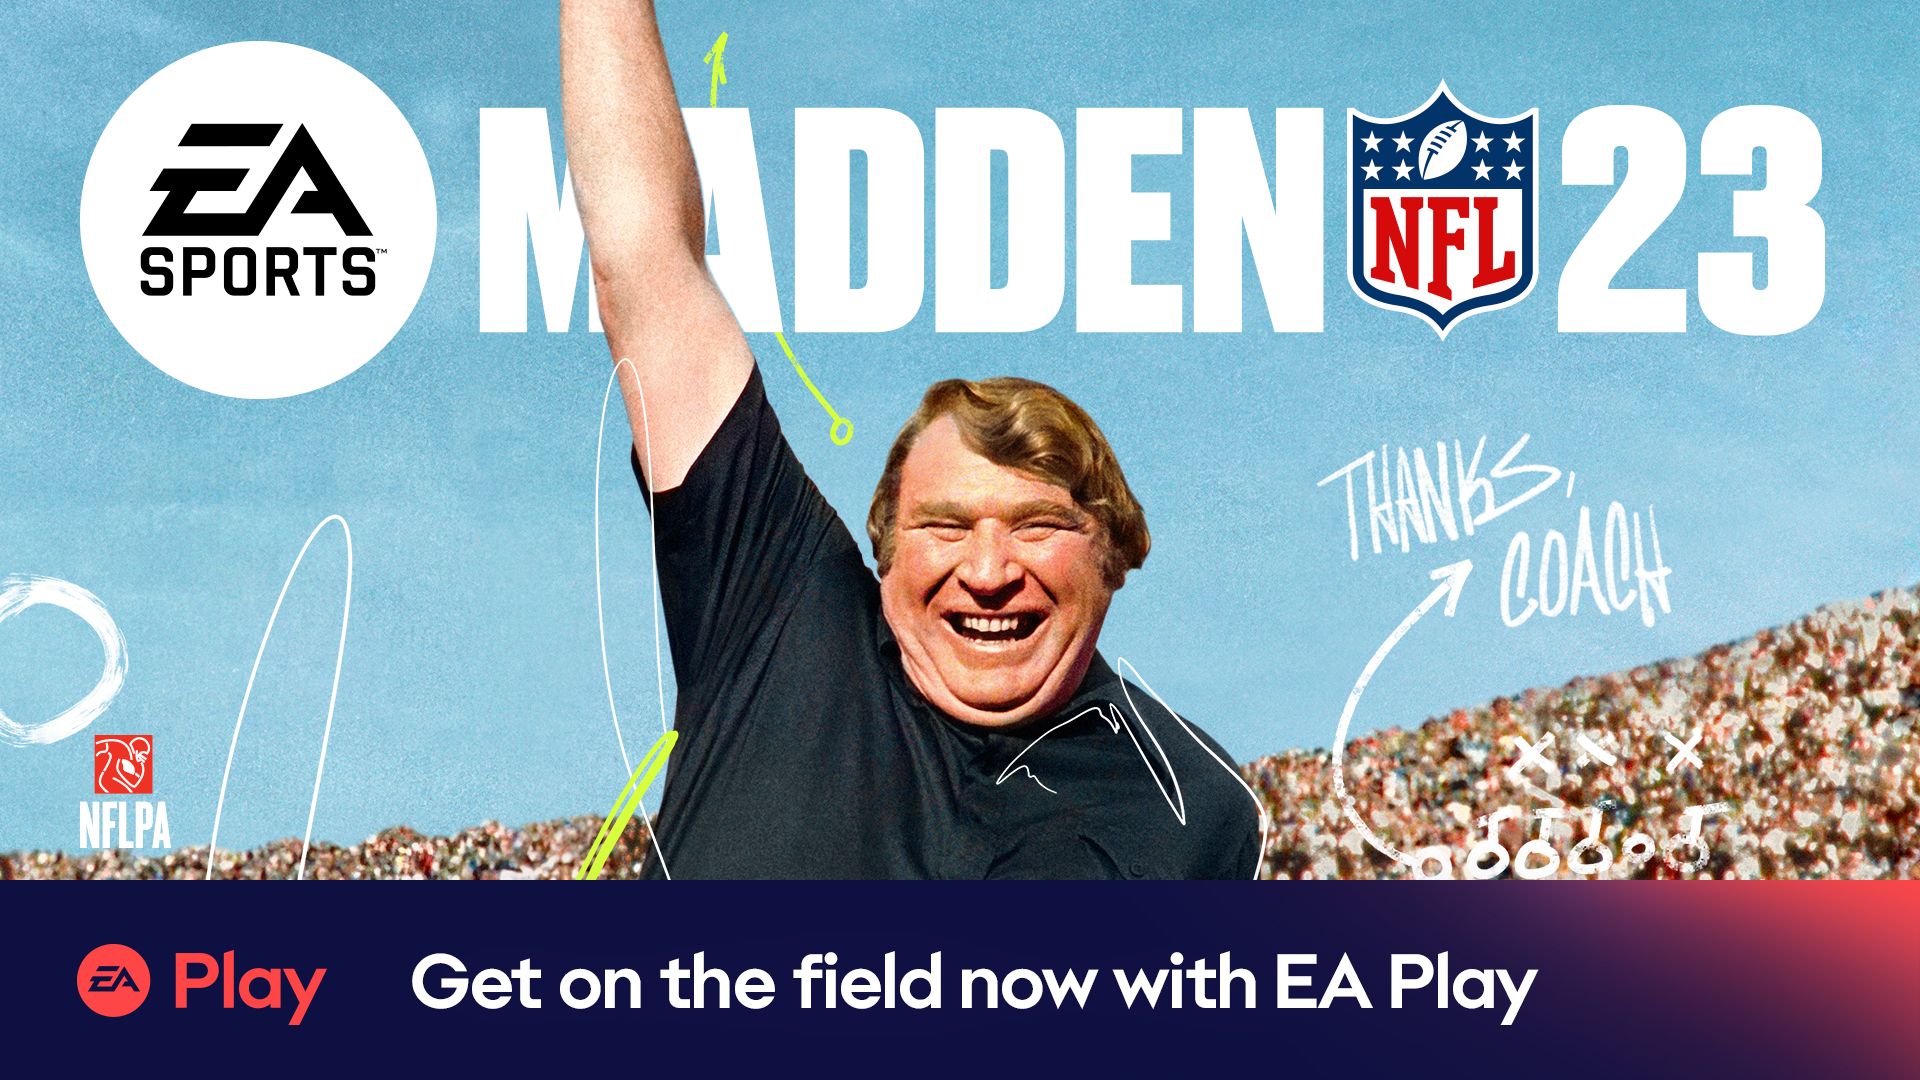 Jump into Madden NFL 23 Early with EA Play